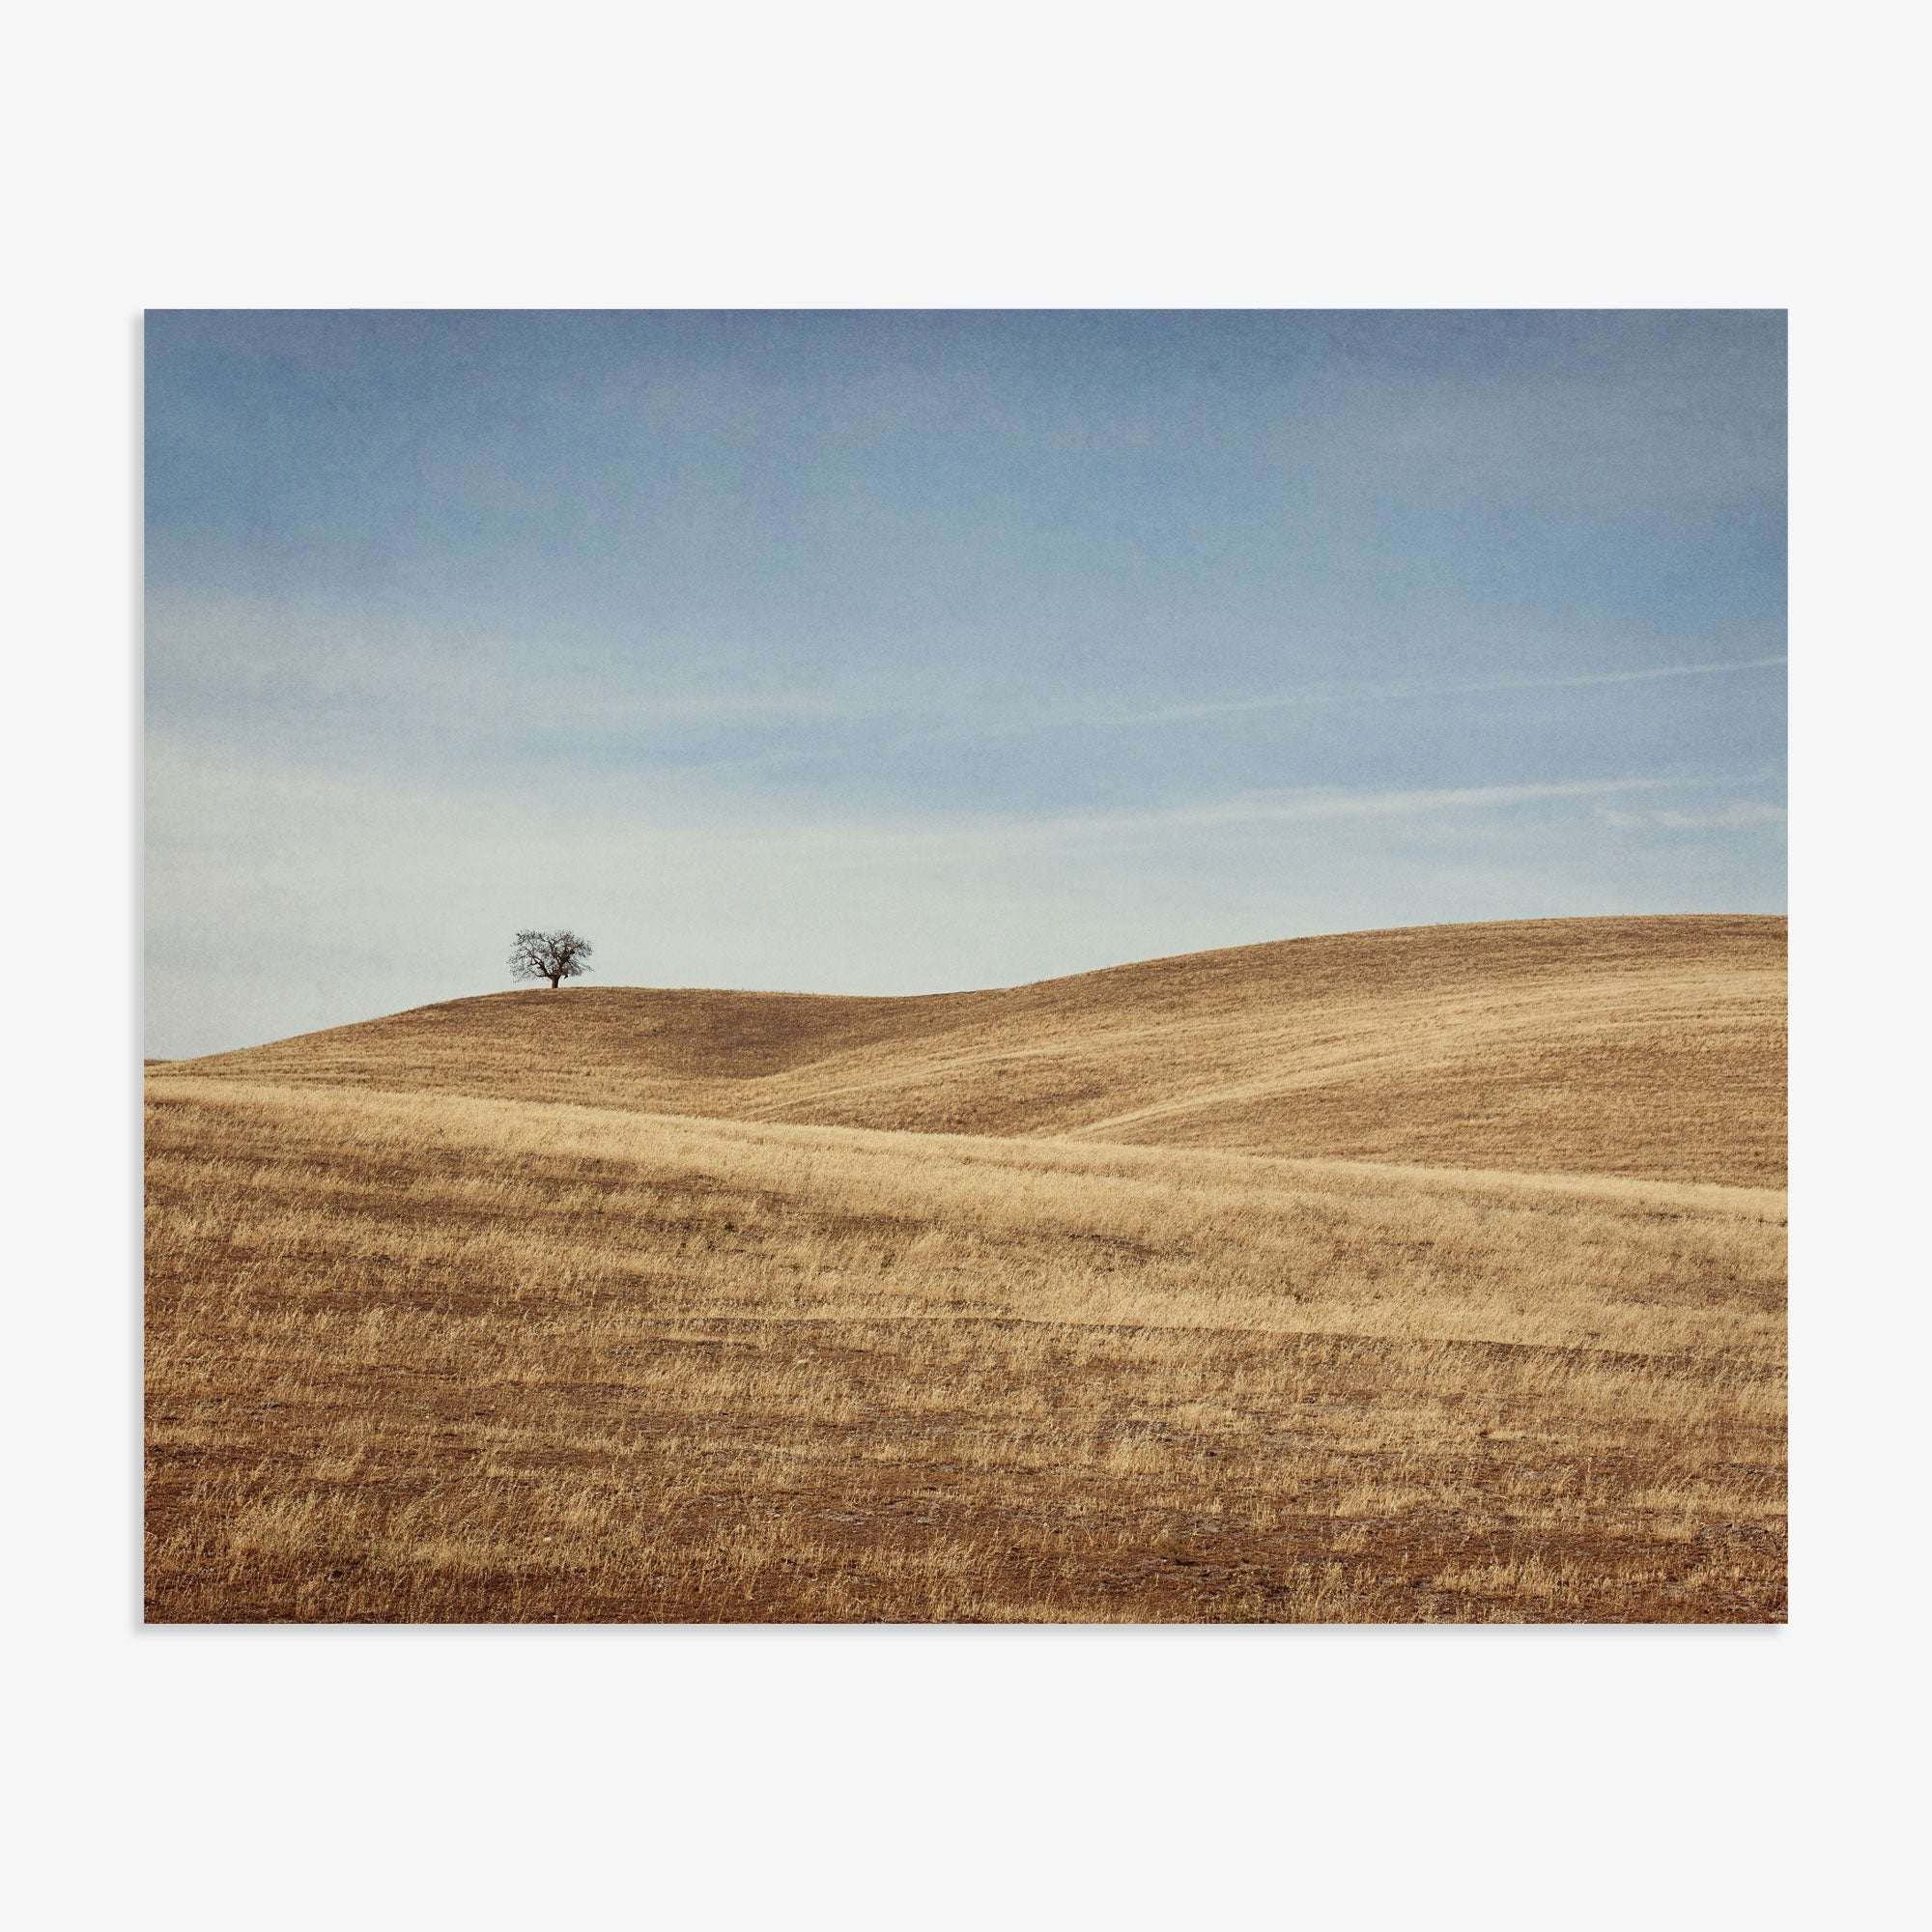 A solitary tree stands on a gently rolling, golden-brown grassy hill in the Santa Ynez Valley under a clear sky with faint clouds. This scene is captured in the California Central Coast Landscape Print &#39;Golden Ynez&#39; by Offley Green.